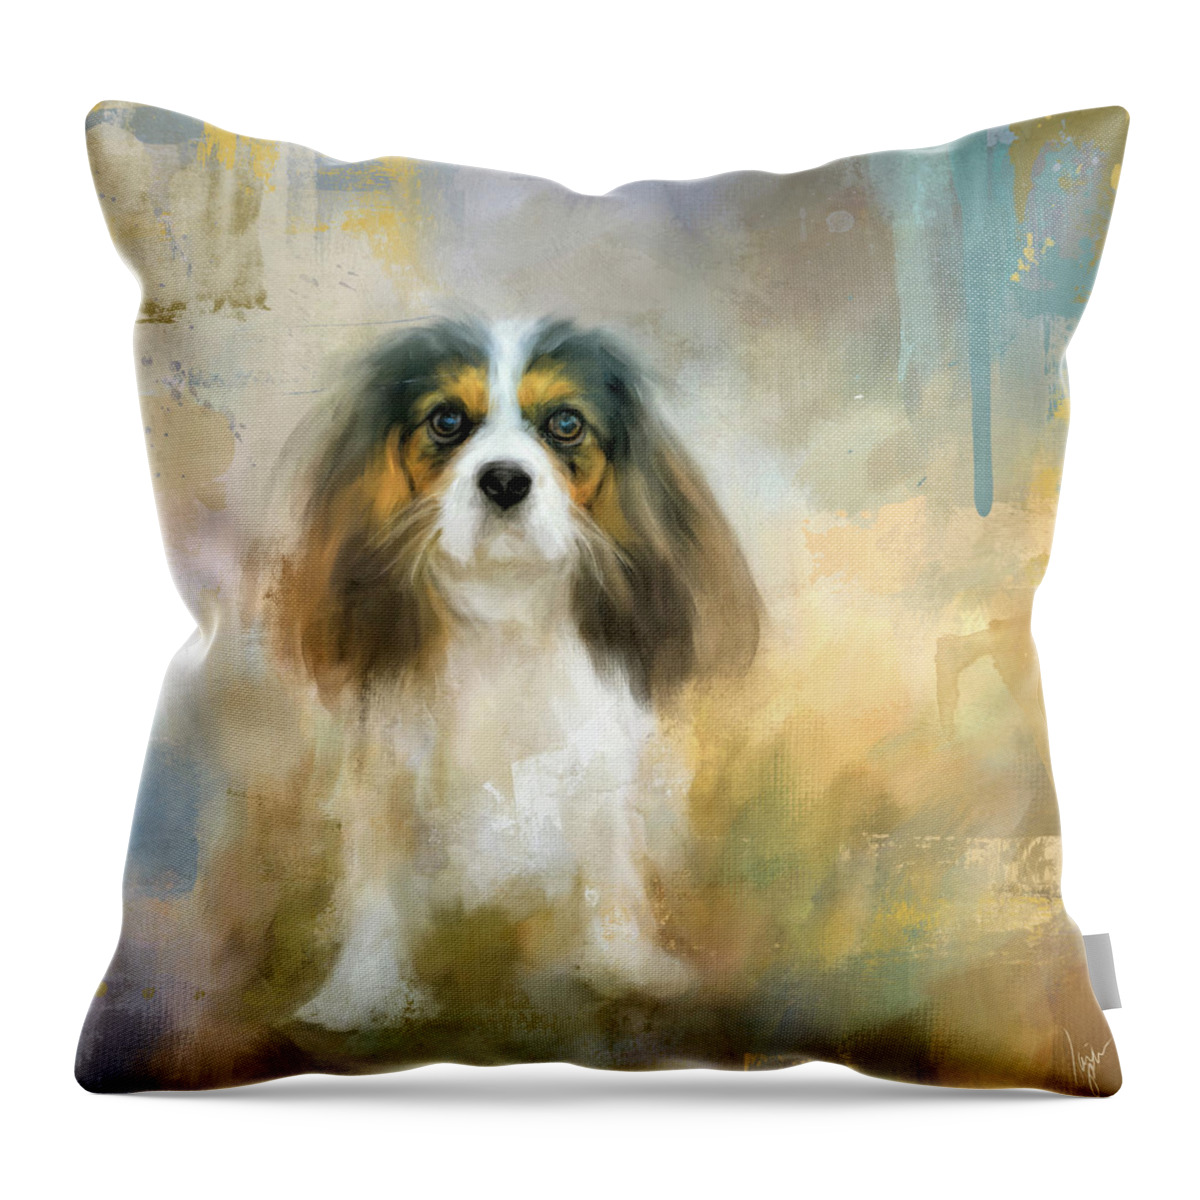 Colorful Throw Pillow featuring the painting The Attentive Cavalier by Jai Johnson